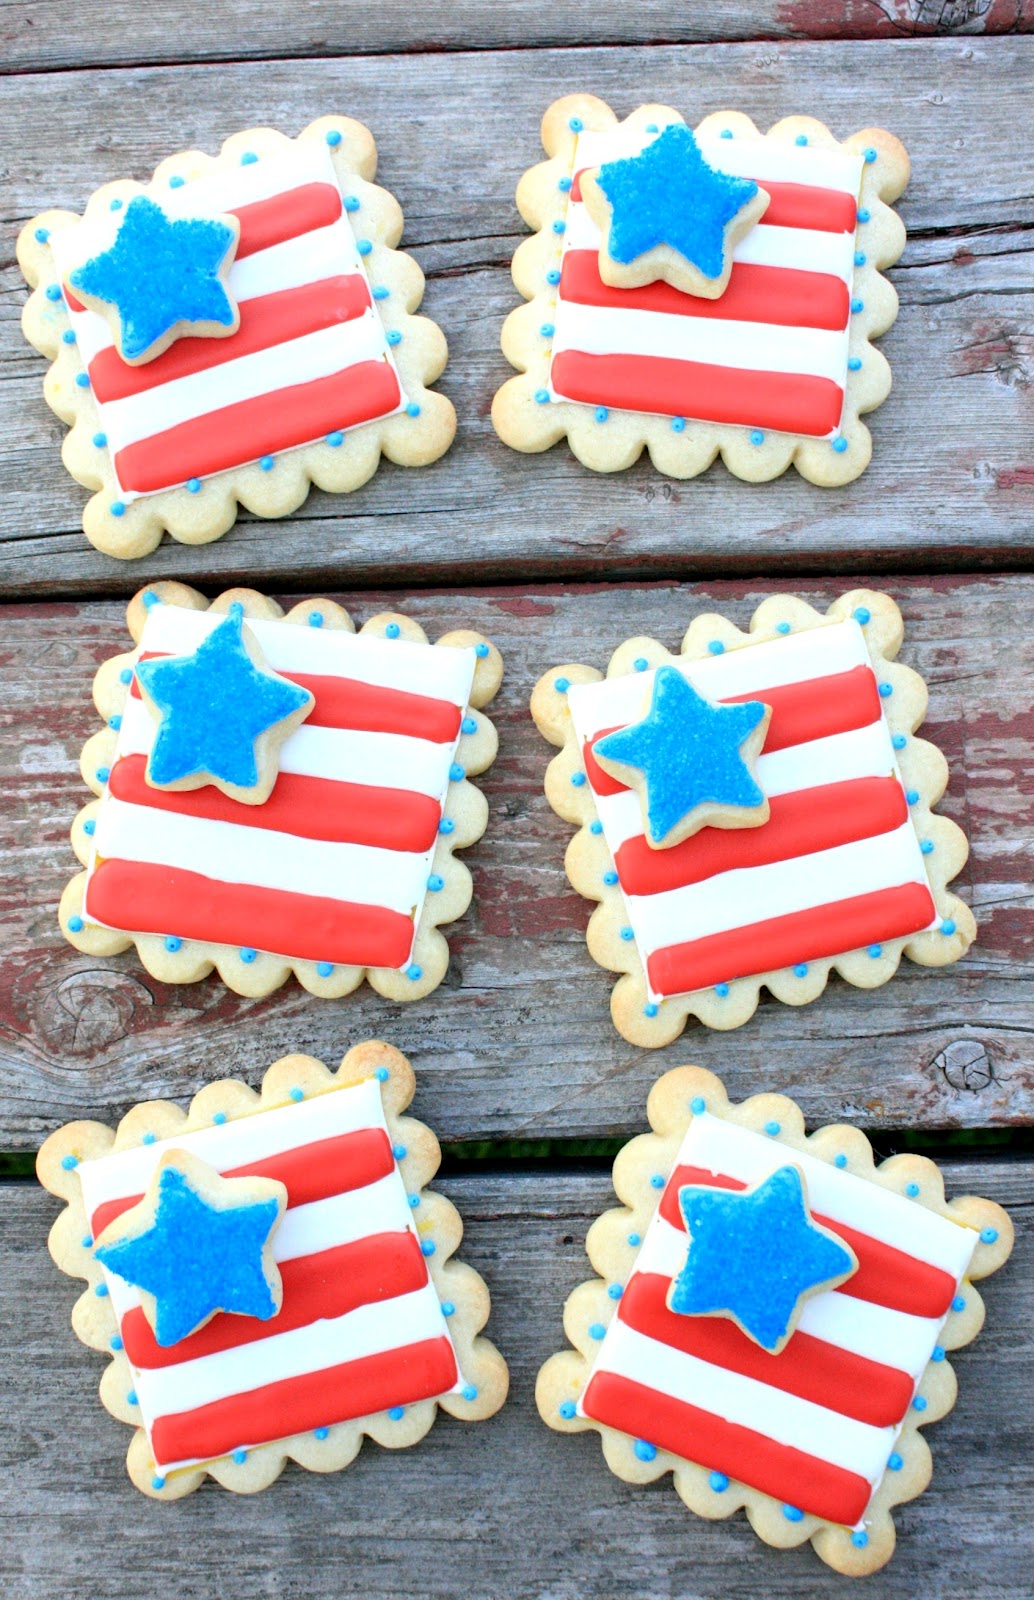 We've found 15 of the Best 4th of July Cookies.  These red, white and blue desserts will wow your guests at your Fourth of July party or summer family BBQ! These 15 yummy Patriotic Desserts are delicious 4th of July treats.  Pin these easy to make Independence Day cookies for later and follow us for more 4th of July Food Ideas. 